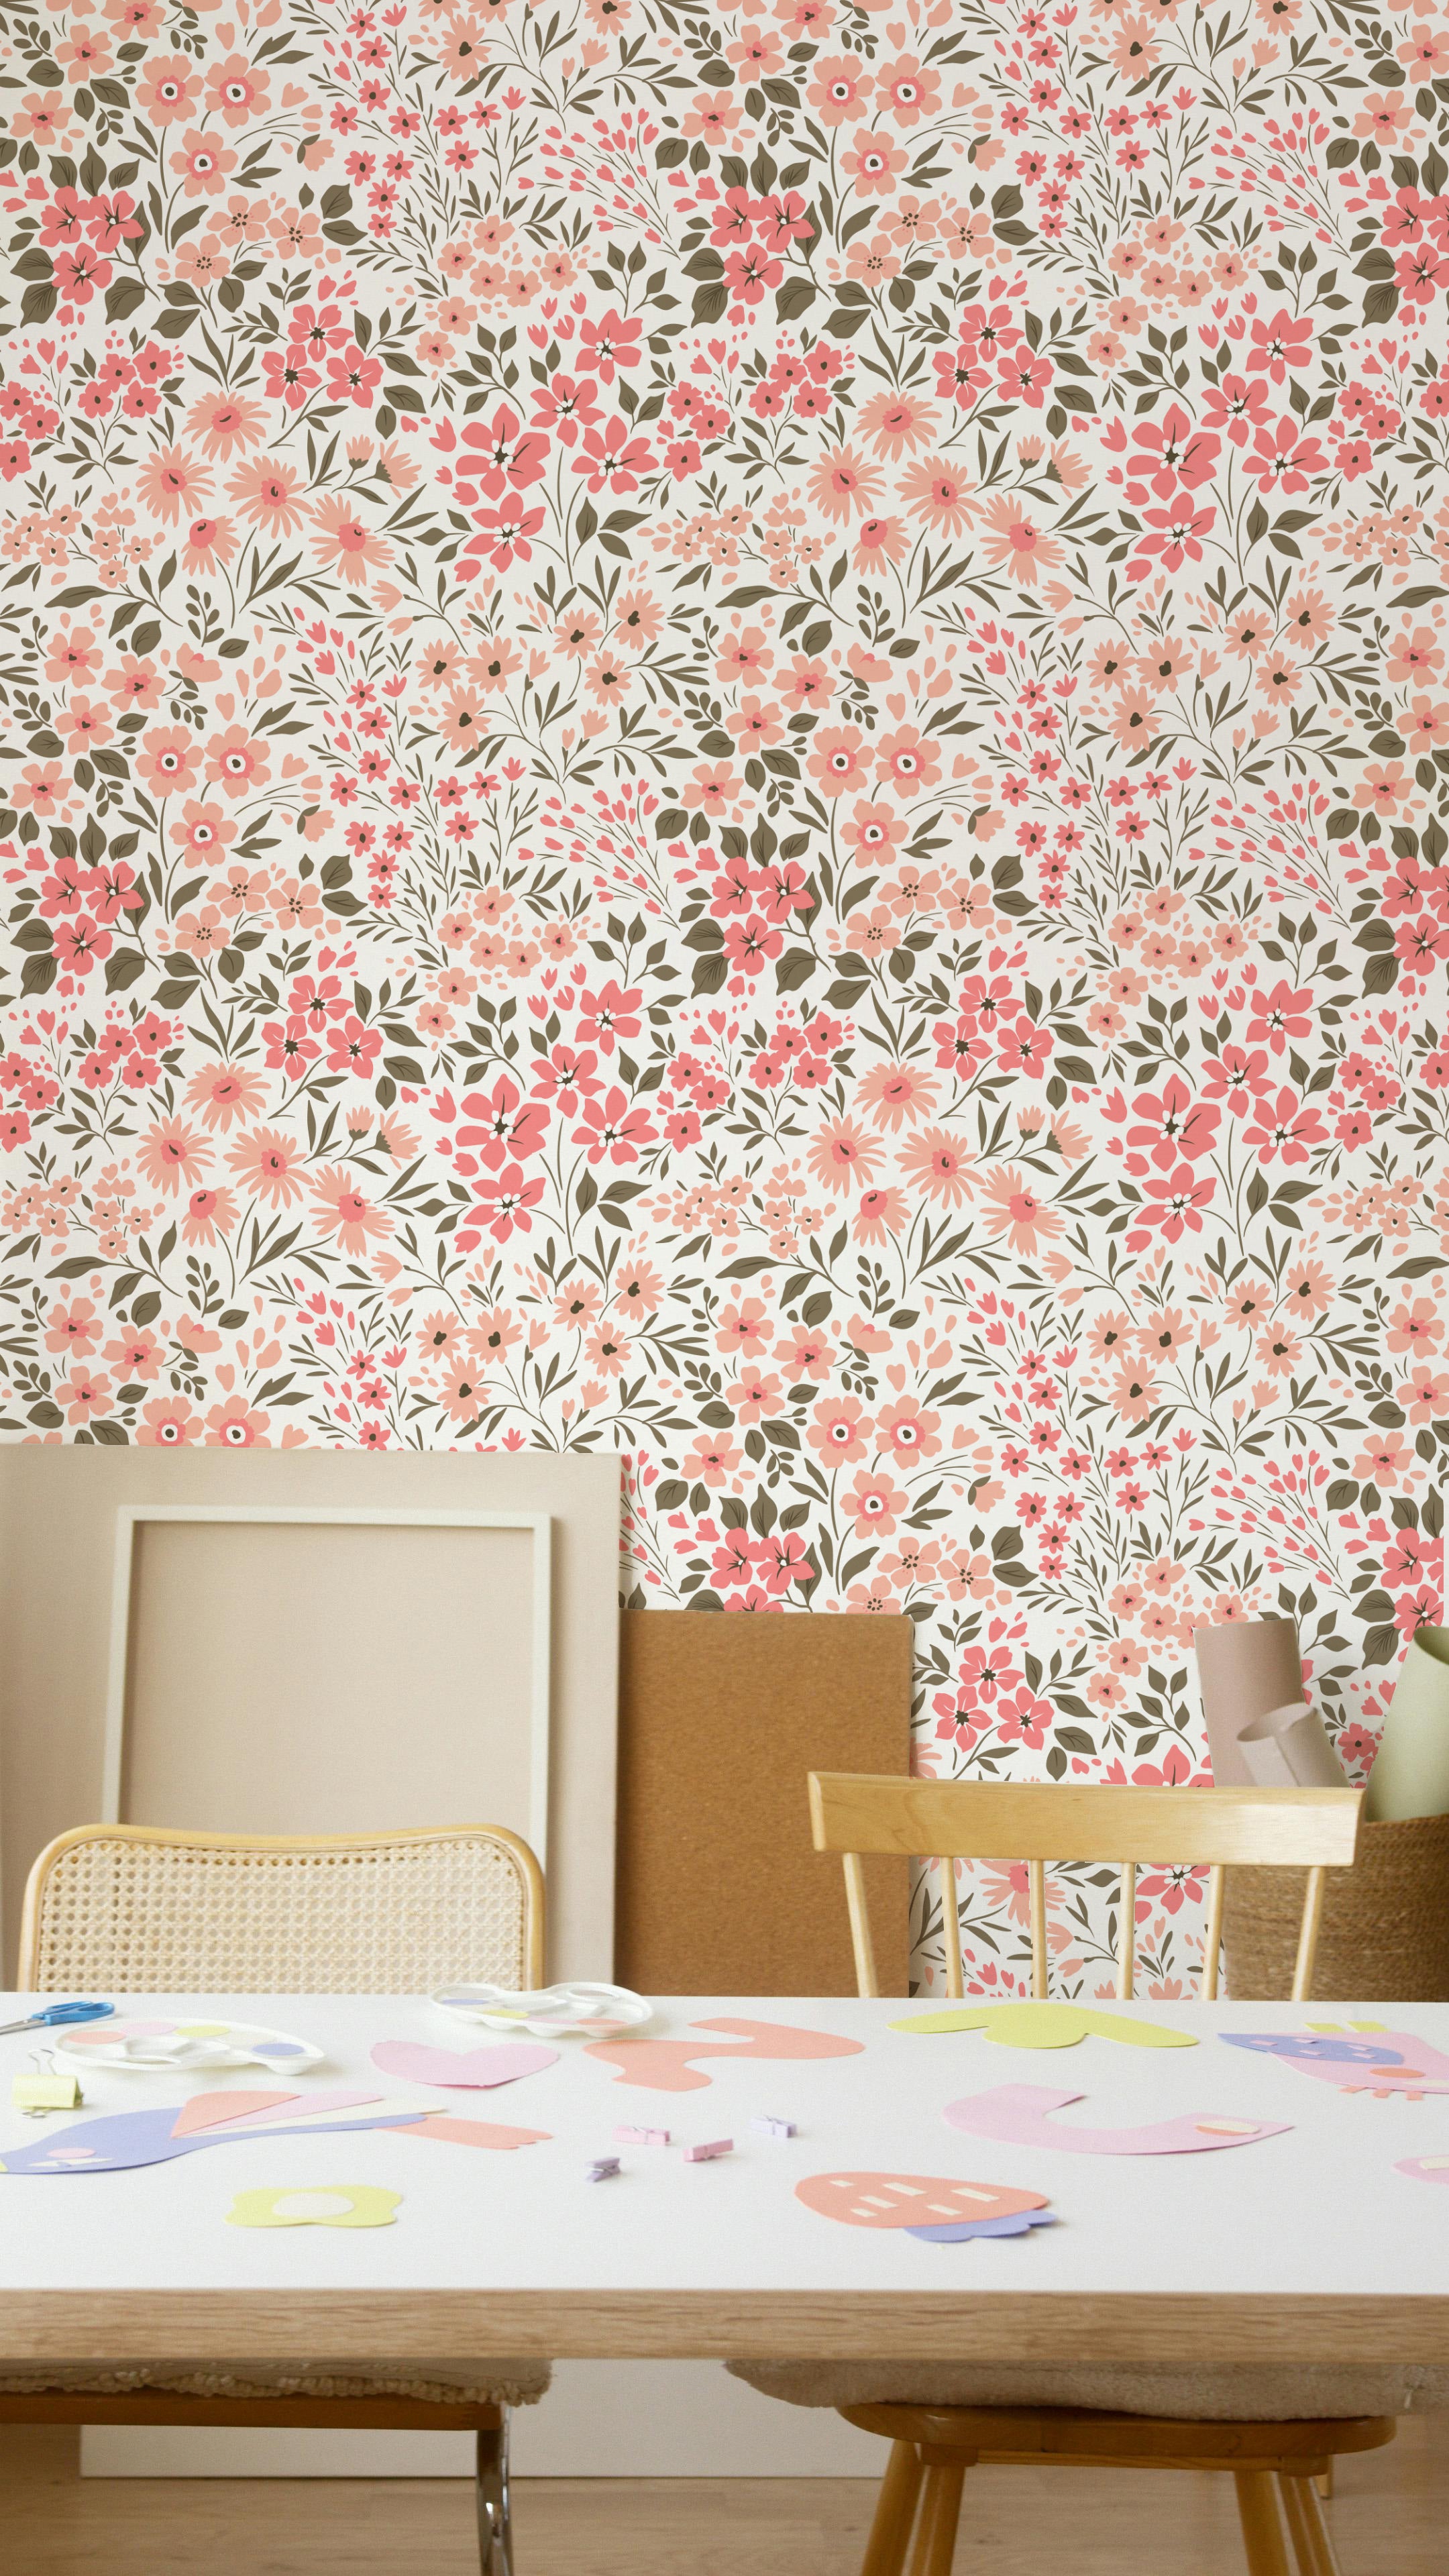 A creative space with a table covered in paper cutouts and crafts supplies, surrounded by chairs. The background wall is adorned with the Floral Frenzy Wallpaper, which has a lively pattern of pink, peach, and beige flowers amidst green leaves.